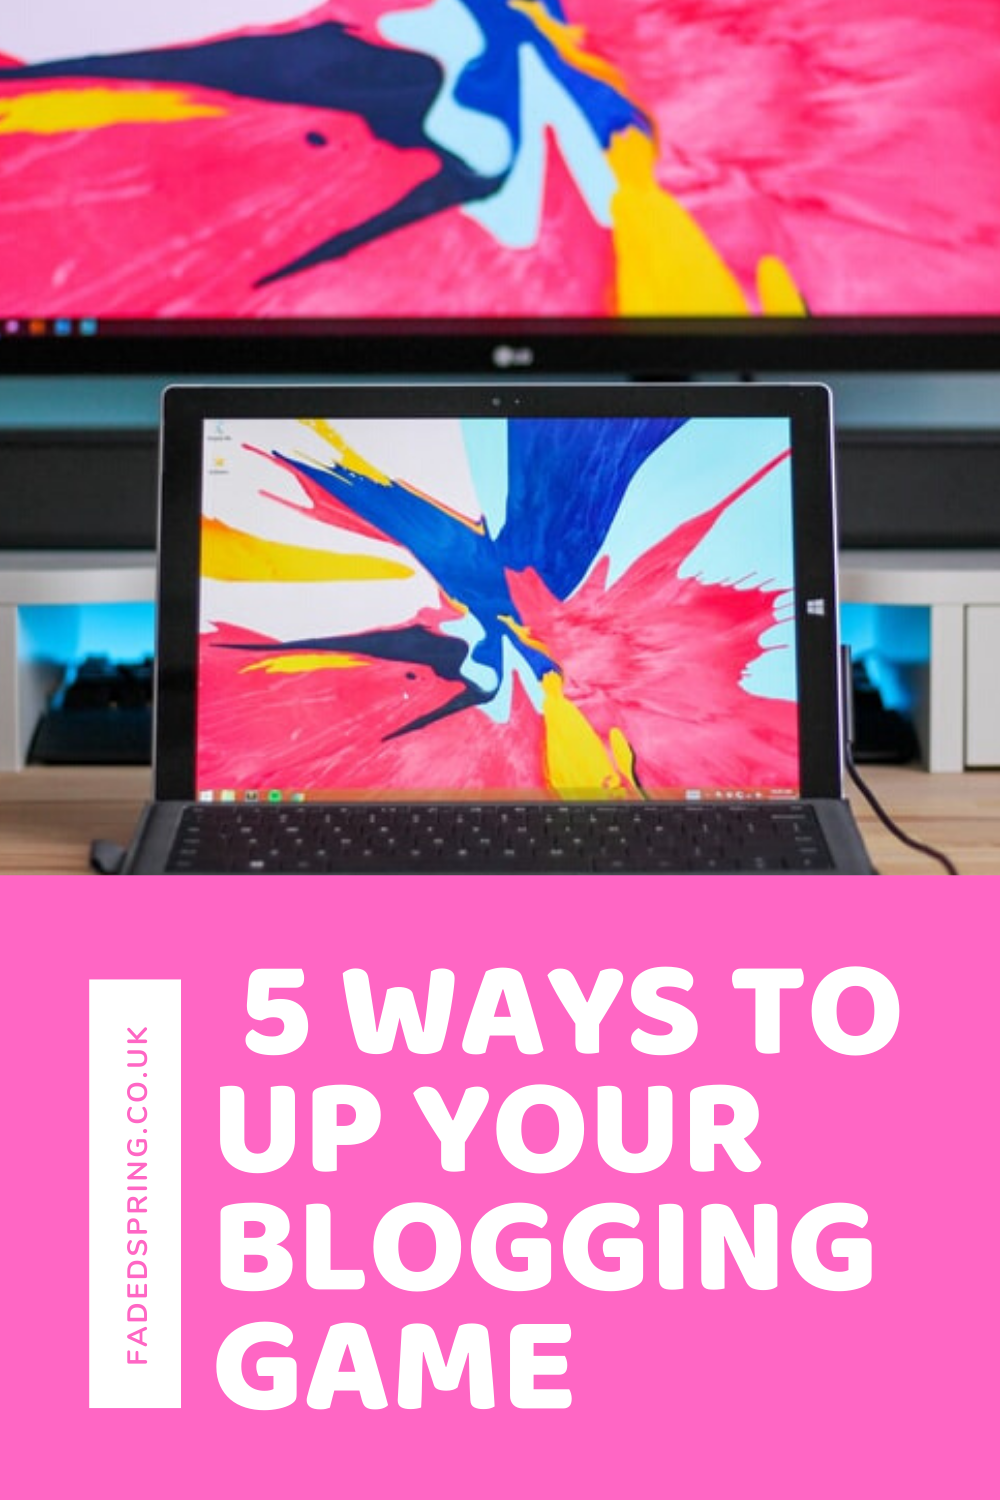 <img src="ana.jpg" alt="ana 5 ways to up your blogging game graphic"/> 